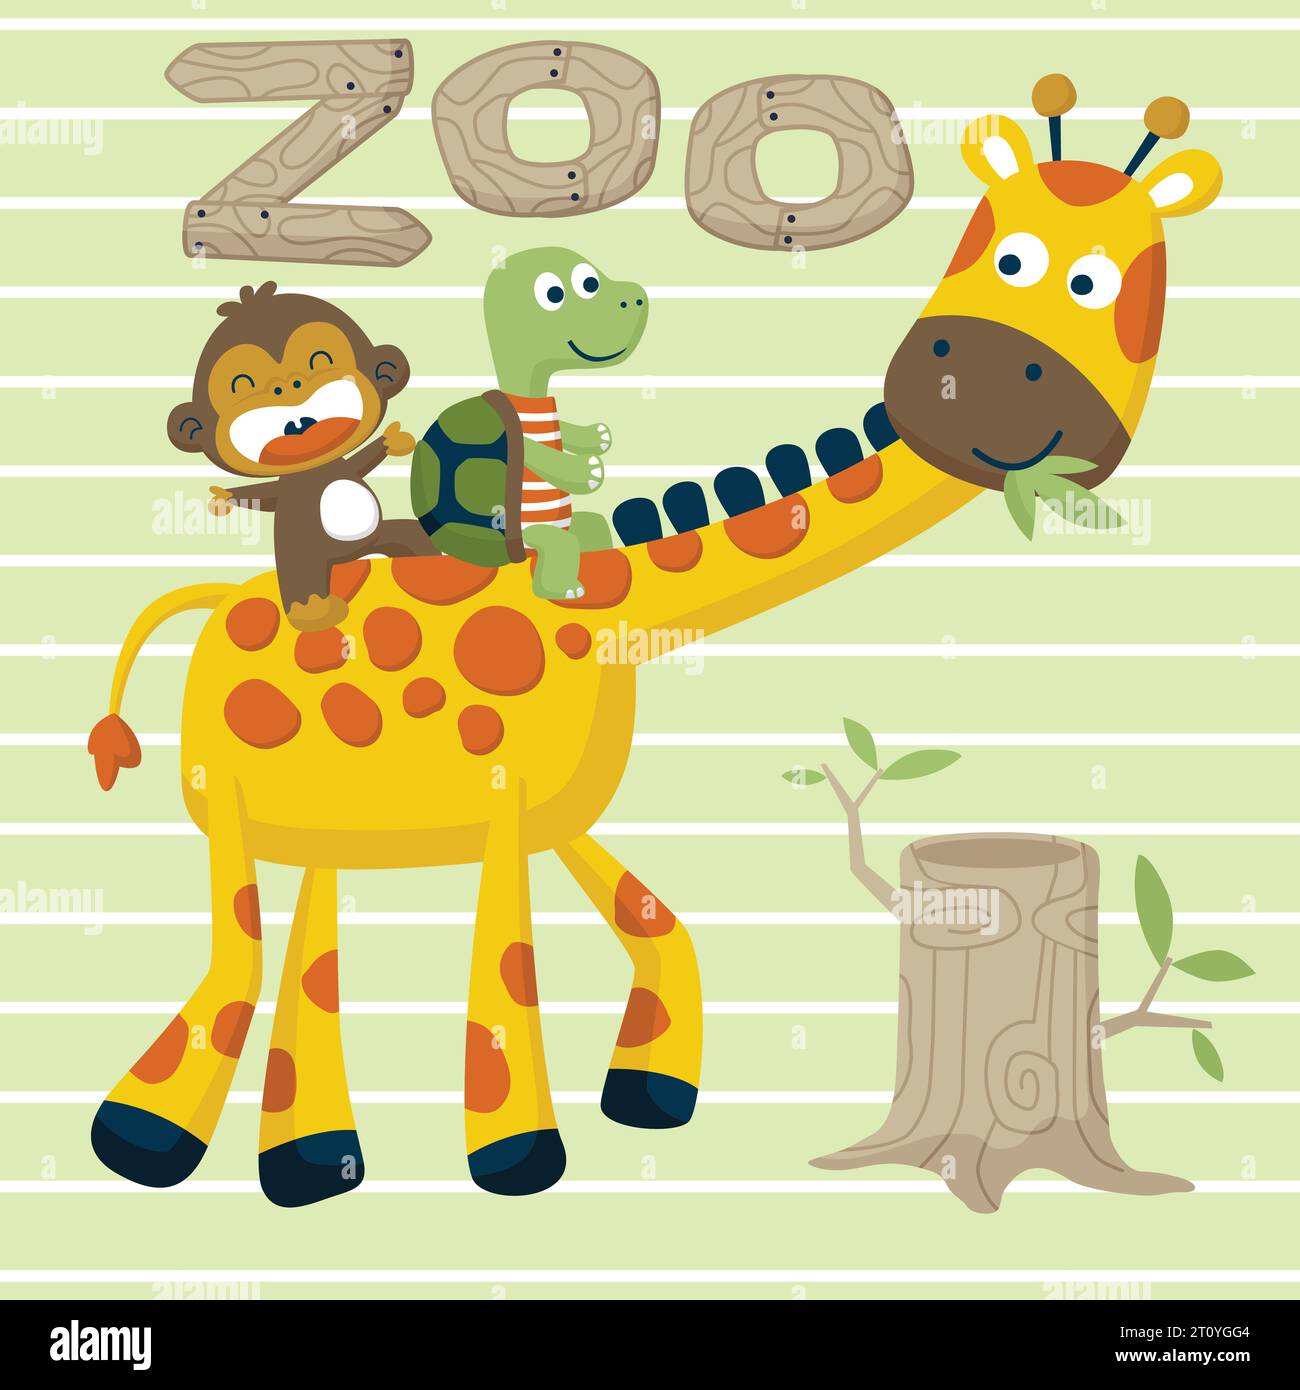 Vector cartoon illustration of monkey and turtle ride on giraffe's back on striped background Stock Vector